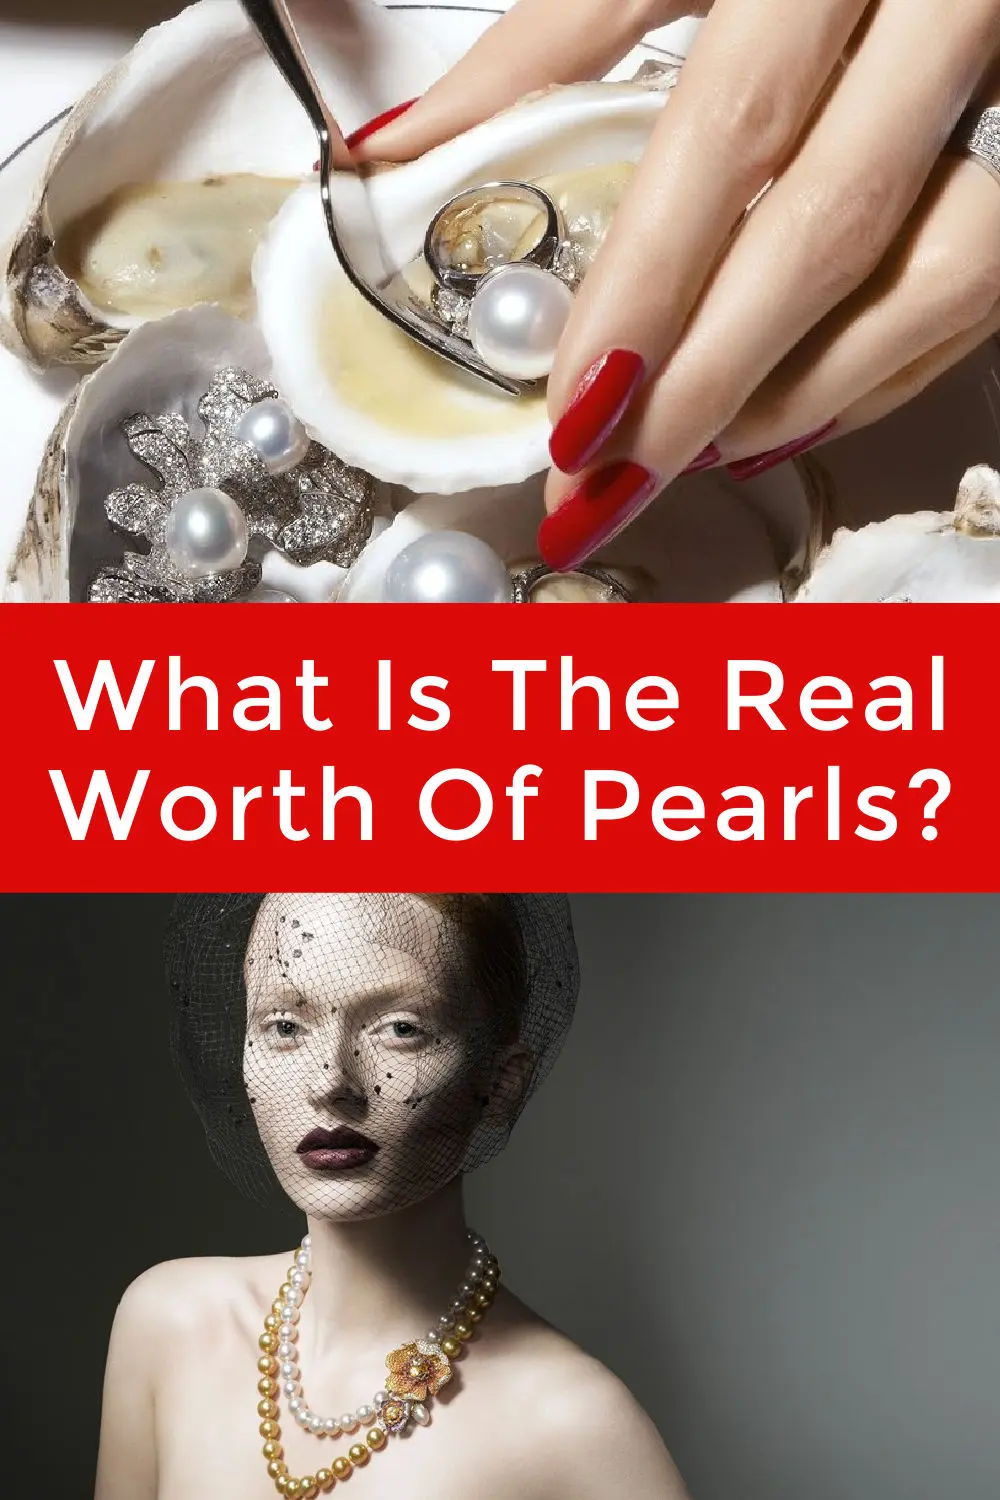 How Valuable are Pearls?